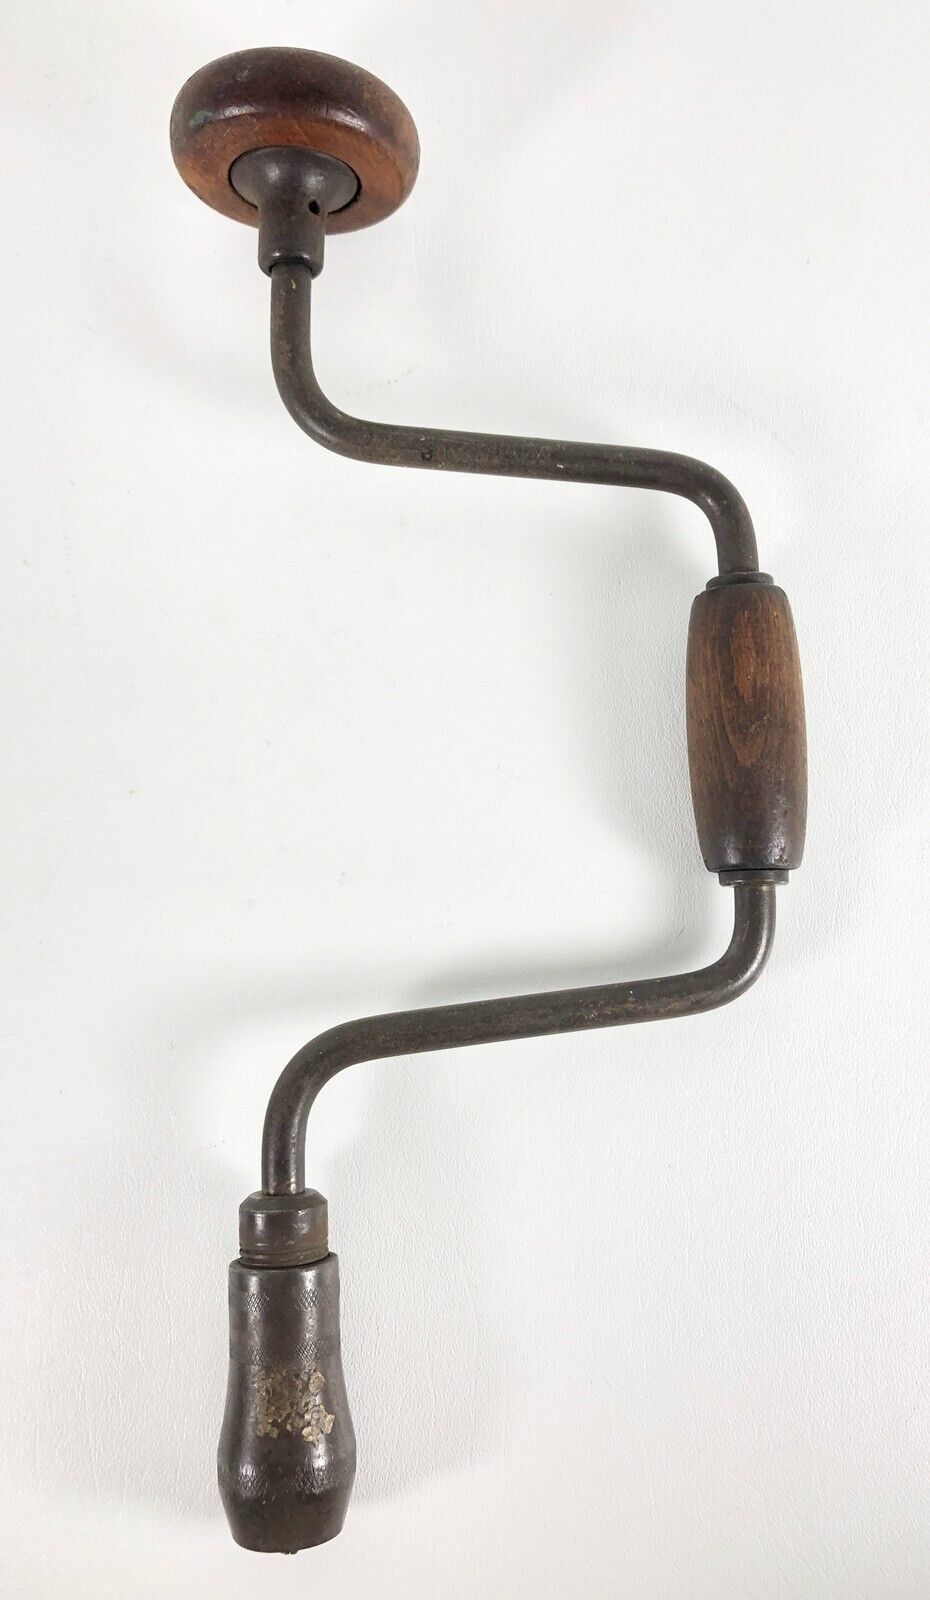 Primary image for Vintage VICTOR HAND CRANK Drill Brace Wood Handle Knob Patina 966-10 in